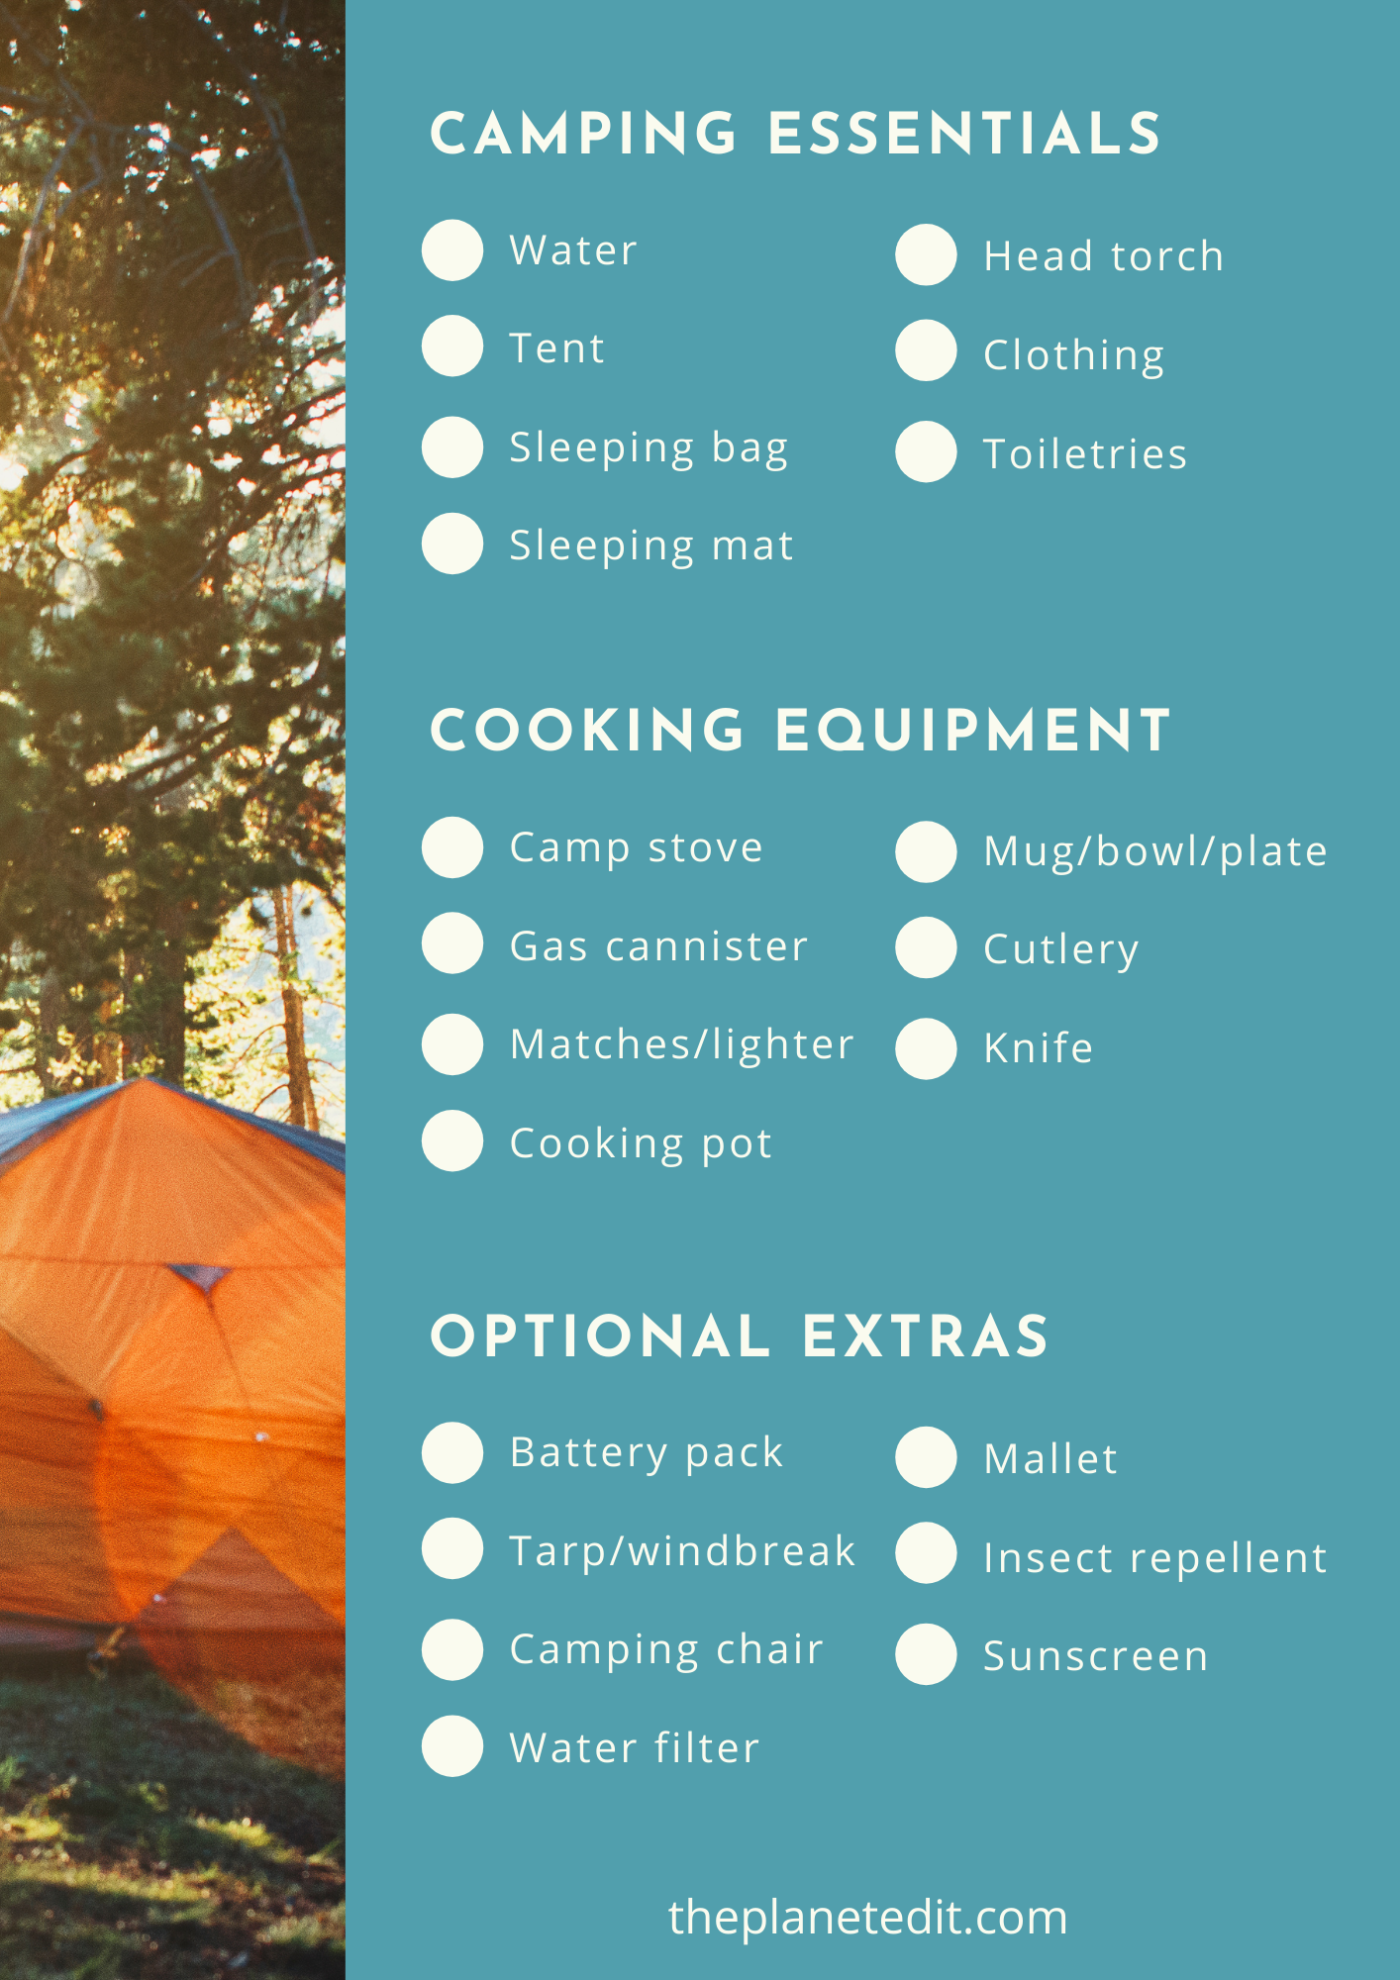 Camping Checklist: Essential Camp Gear to Bring